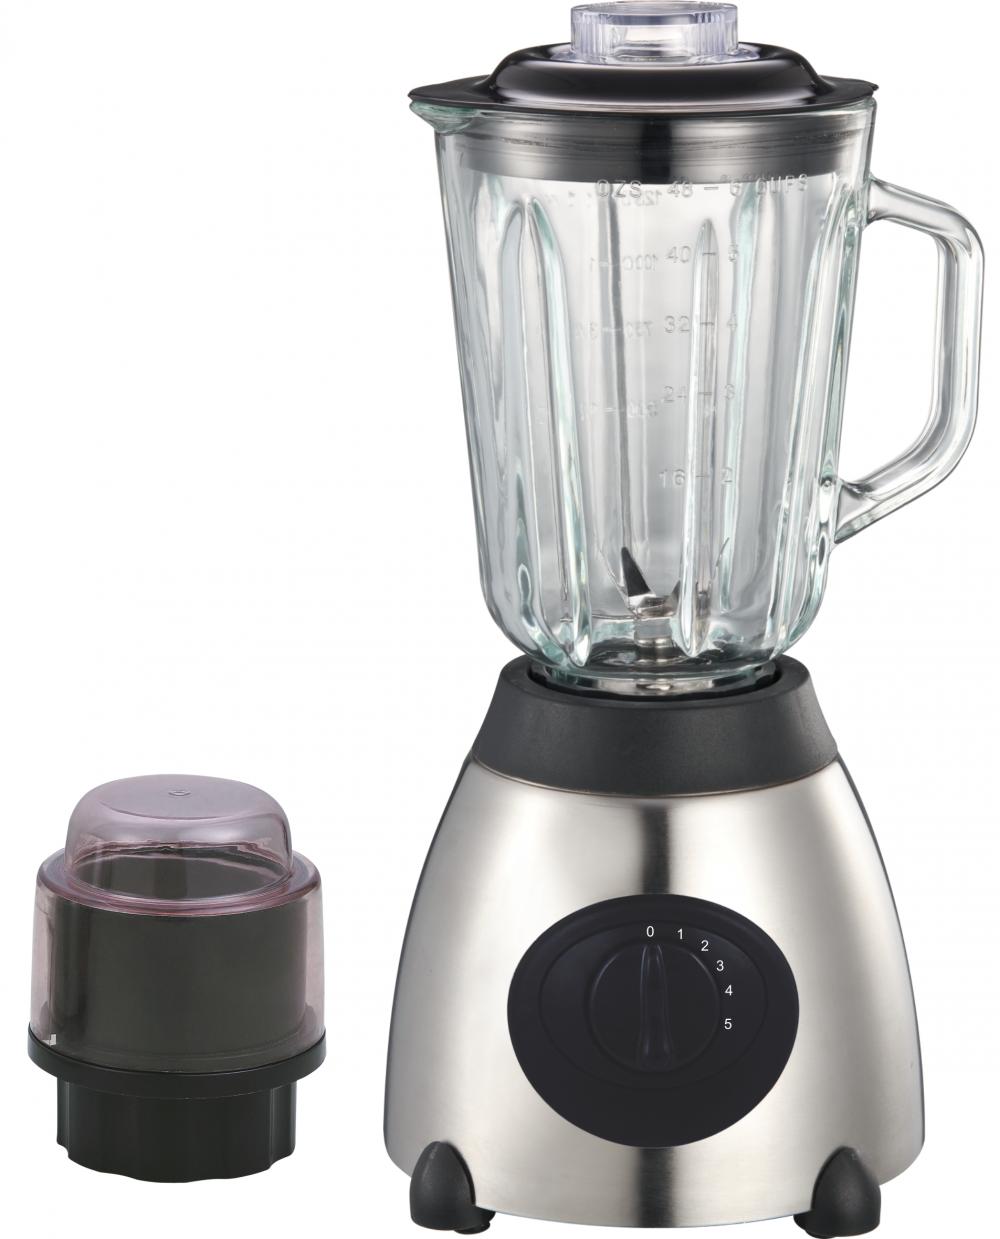 Stainless steel blender with glass jar